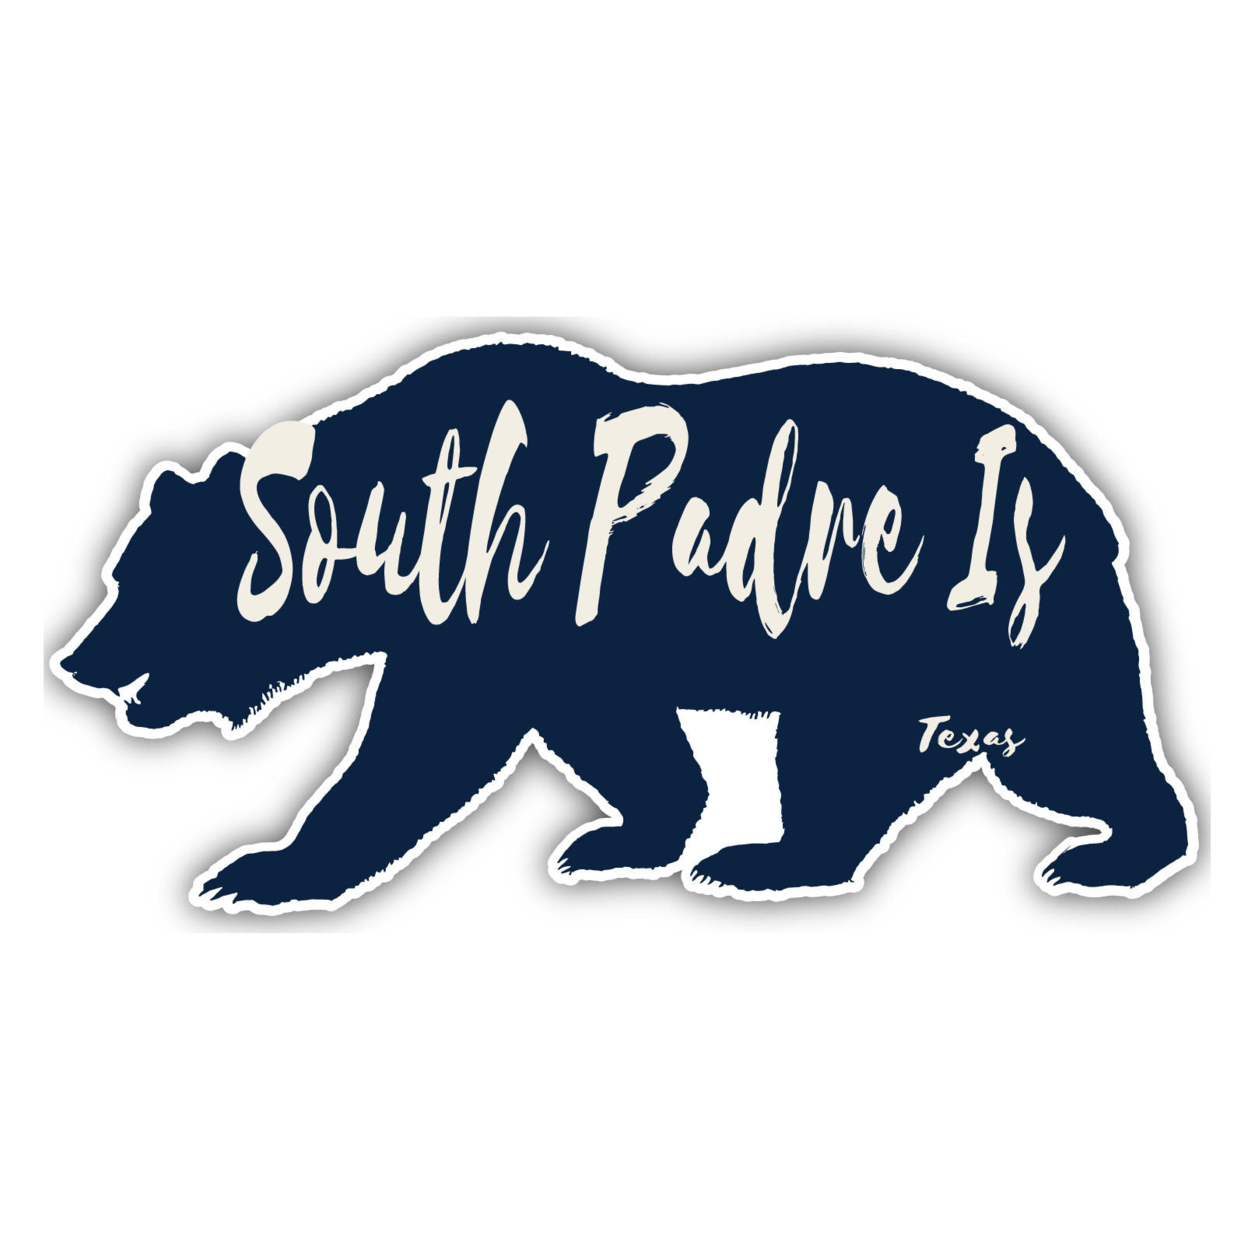 South Padre Is Texas Souvenir Decorative Stickers (Choose Theme And Size) - Single Unit, 2-Inch, Bear